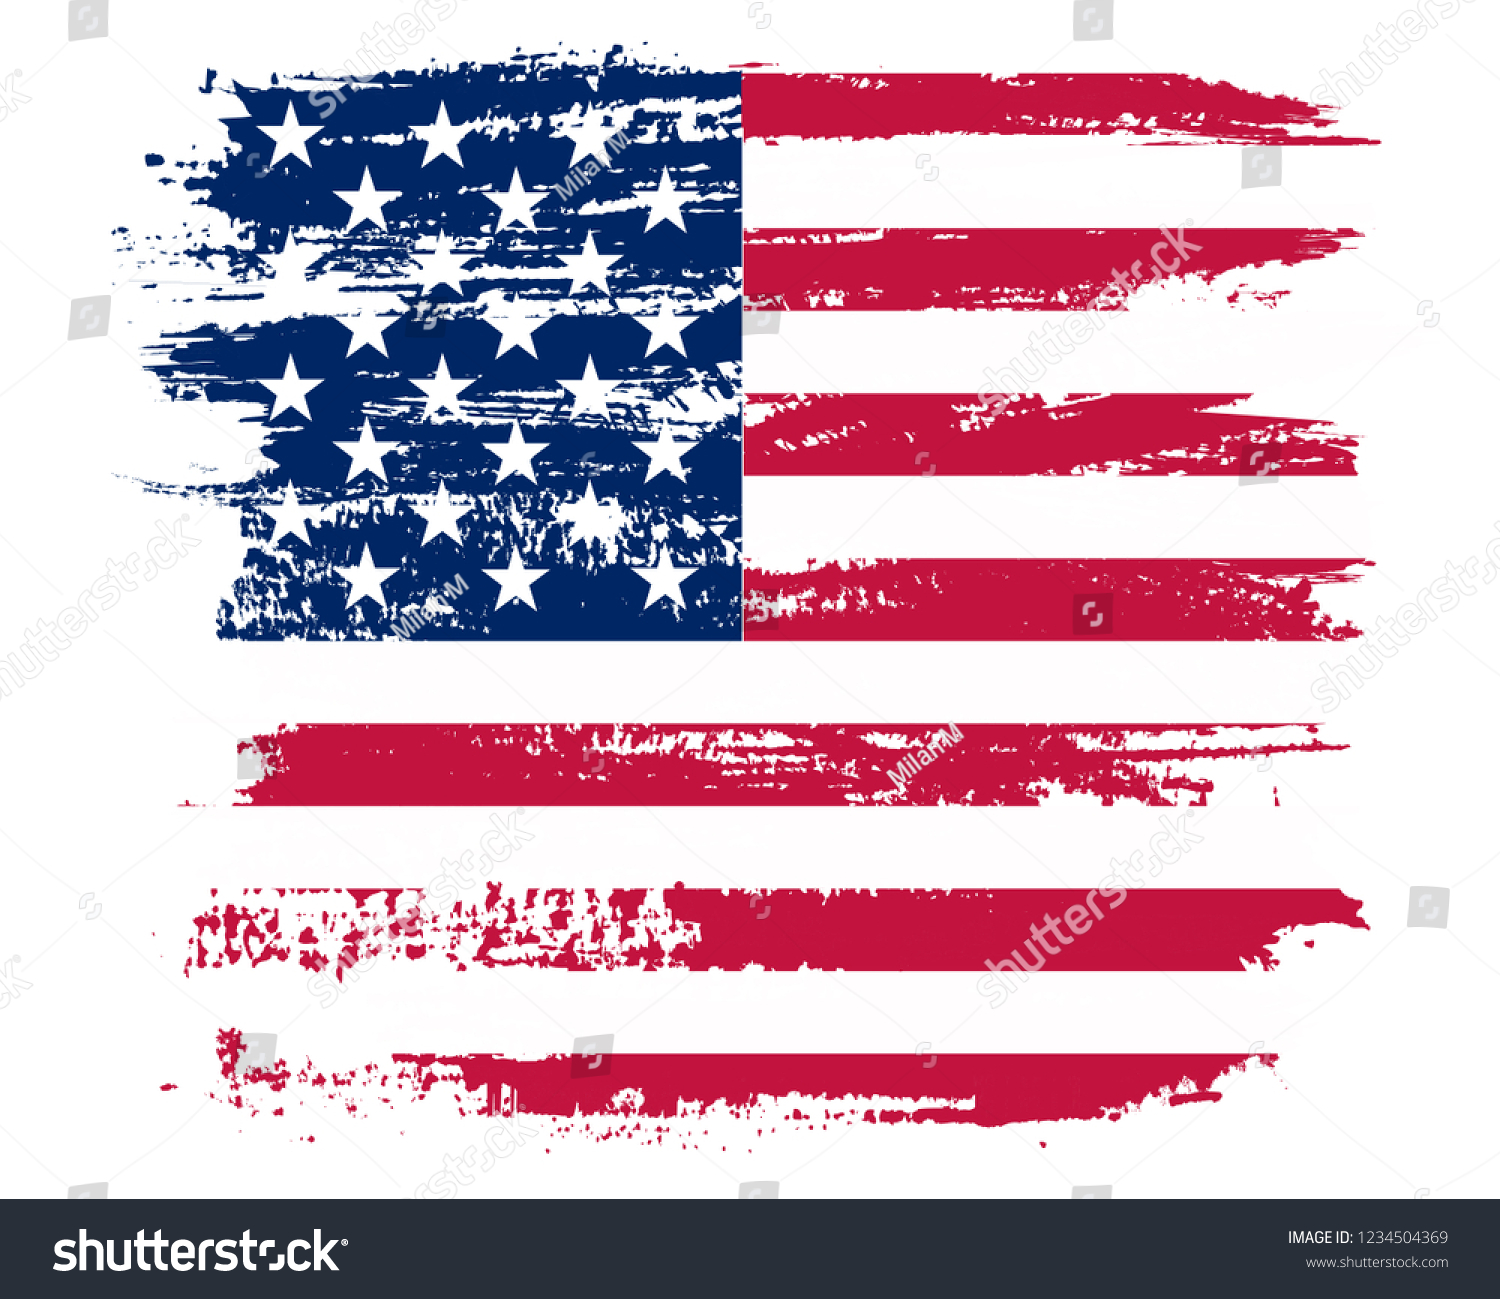 American flag background.Vector grunge flag of United States. #1234504369